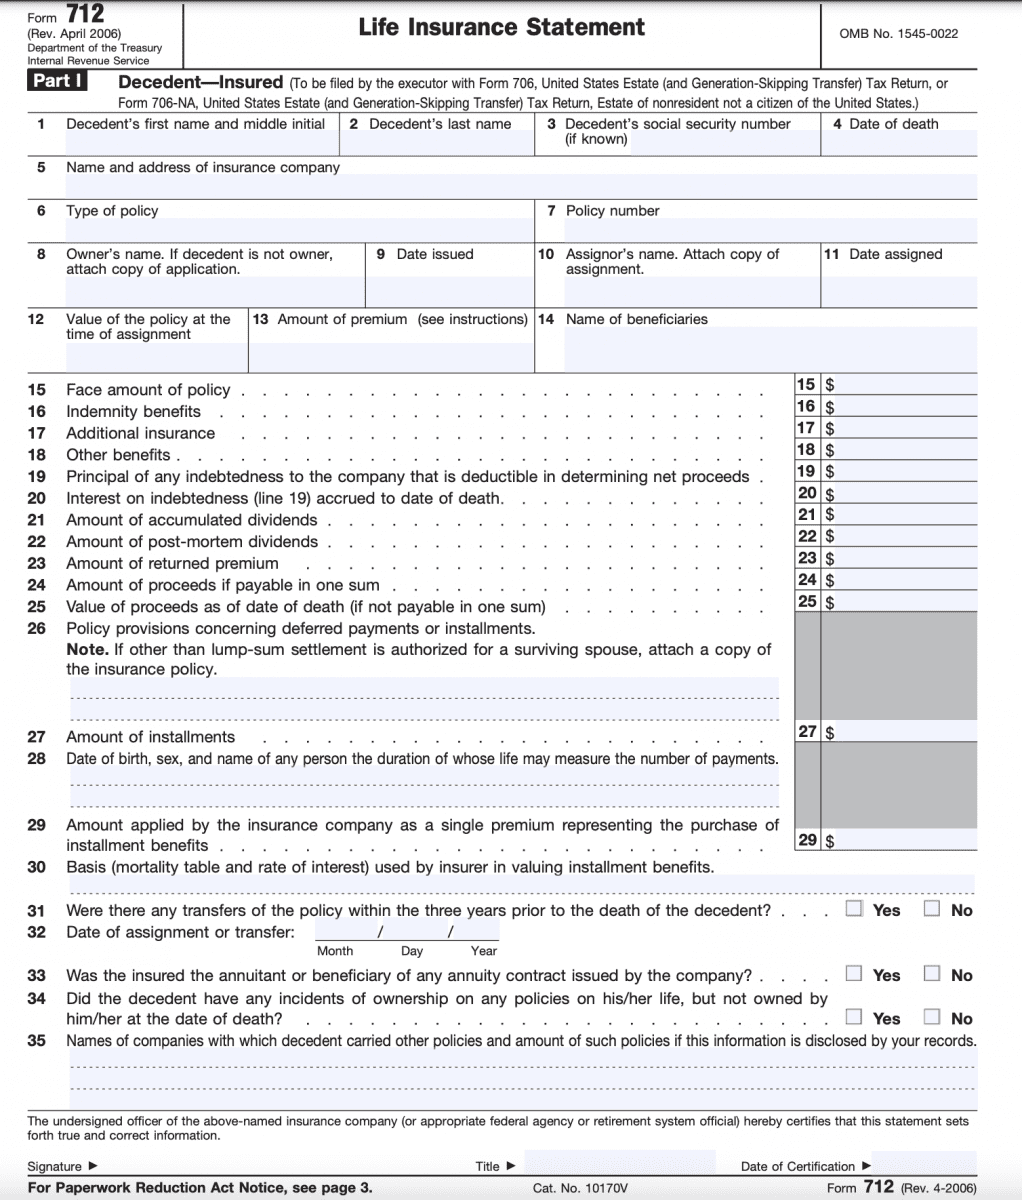 irs-form-712-instructions